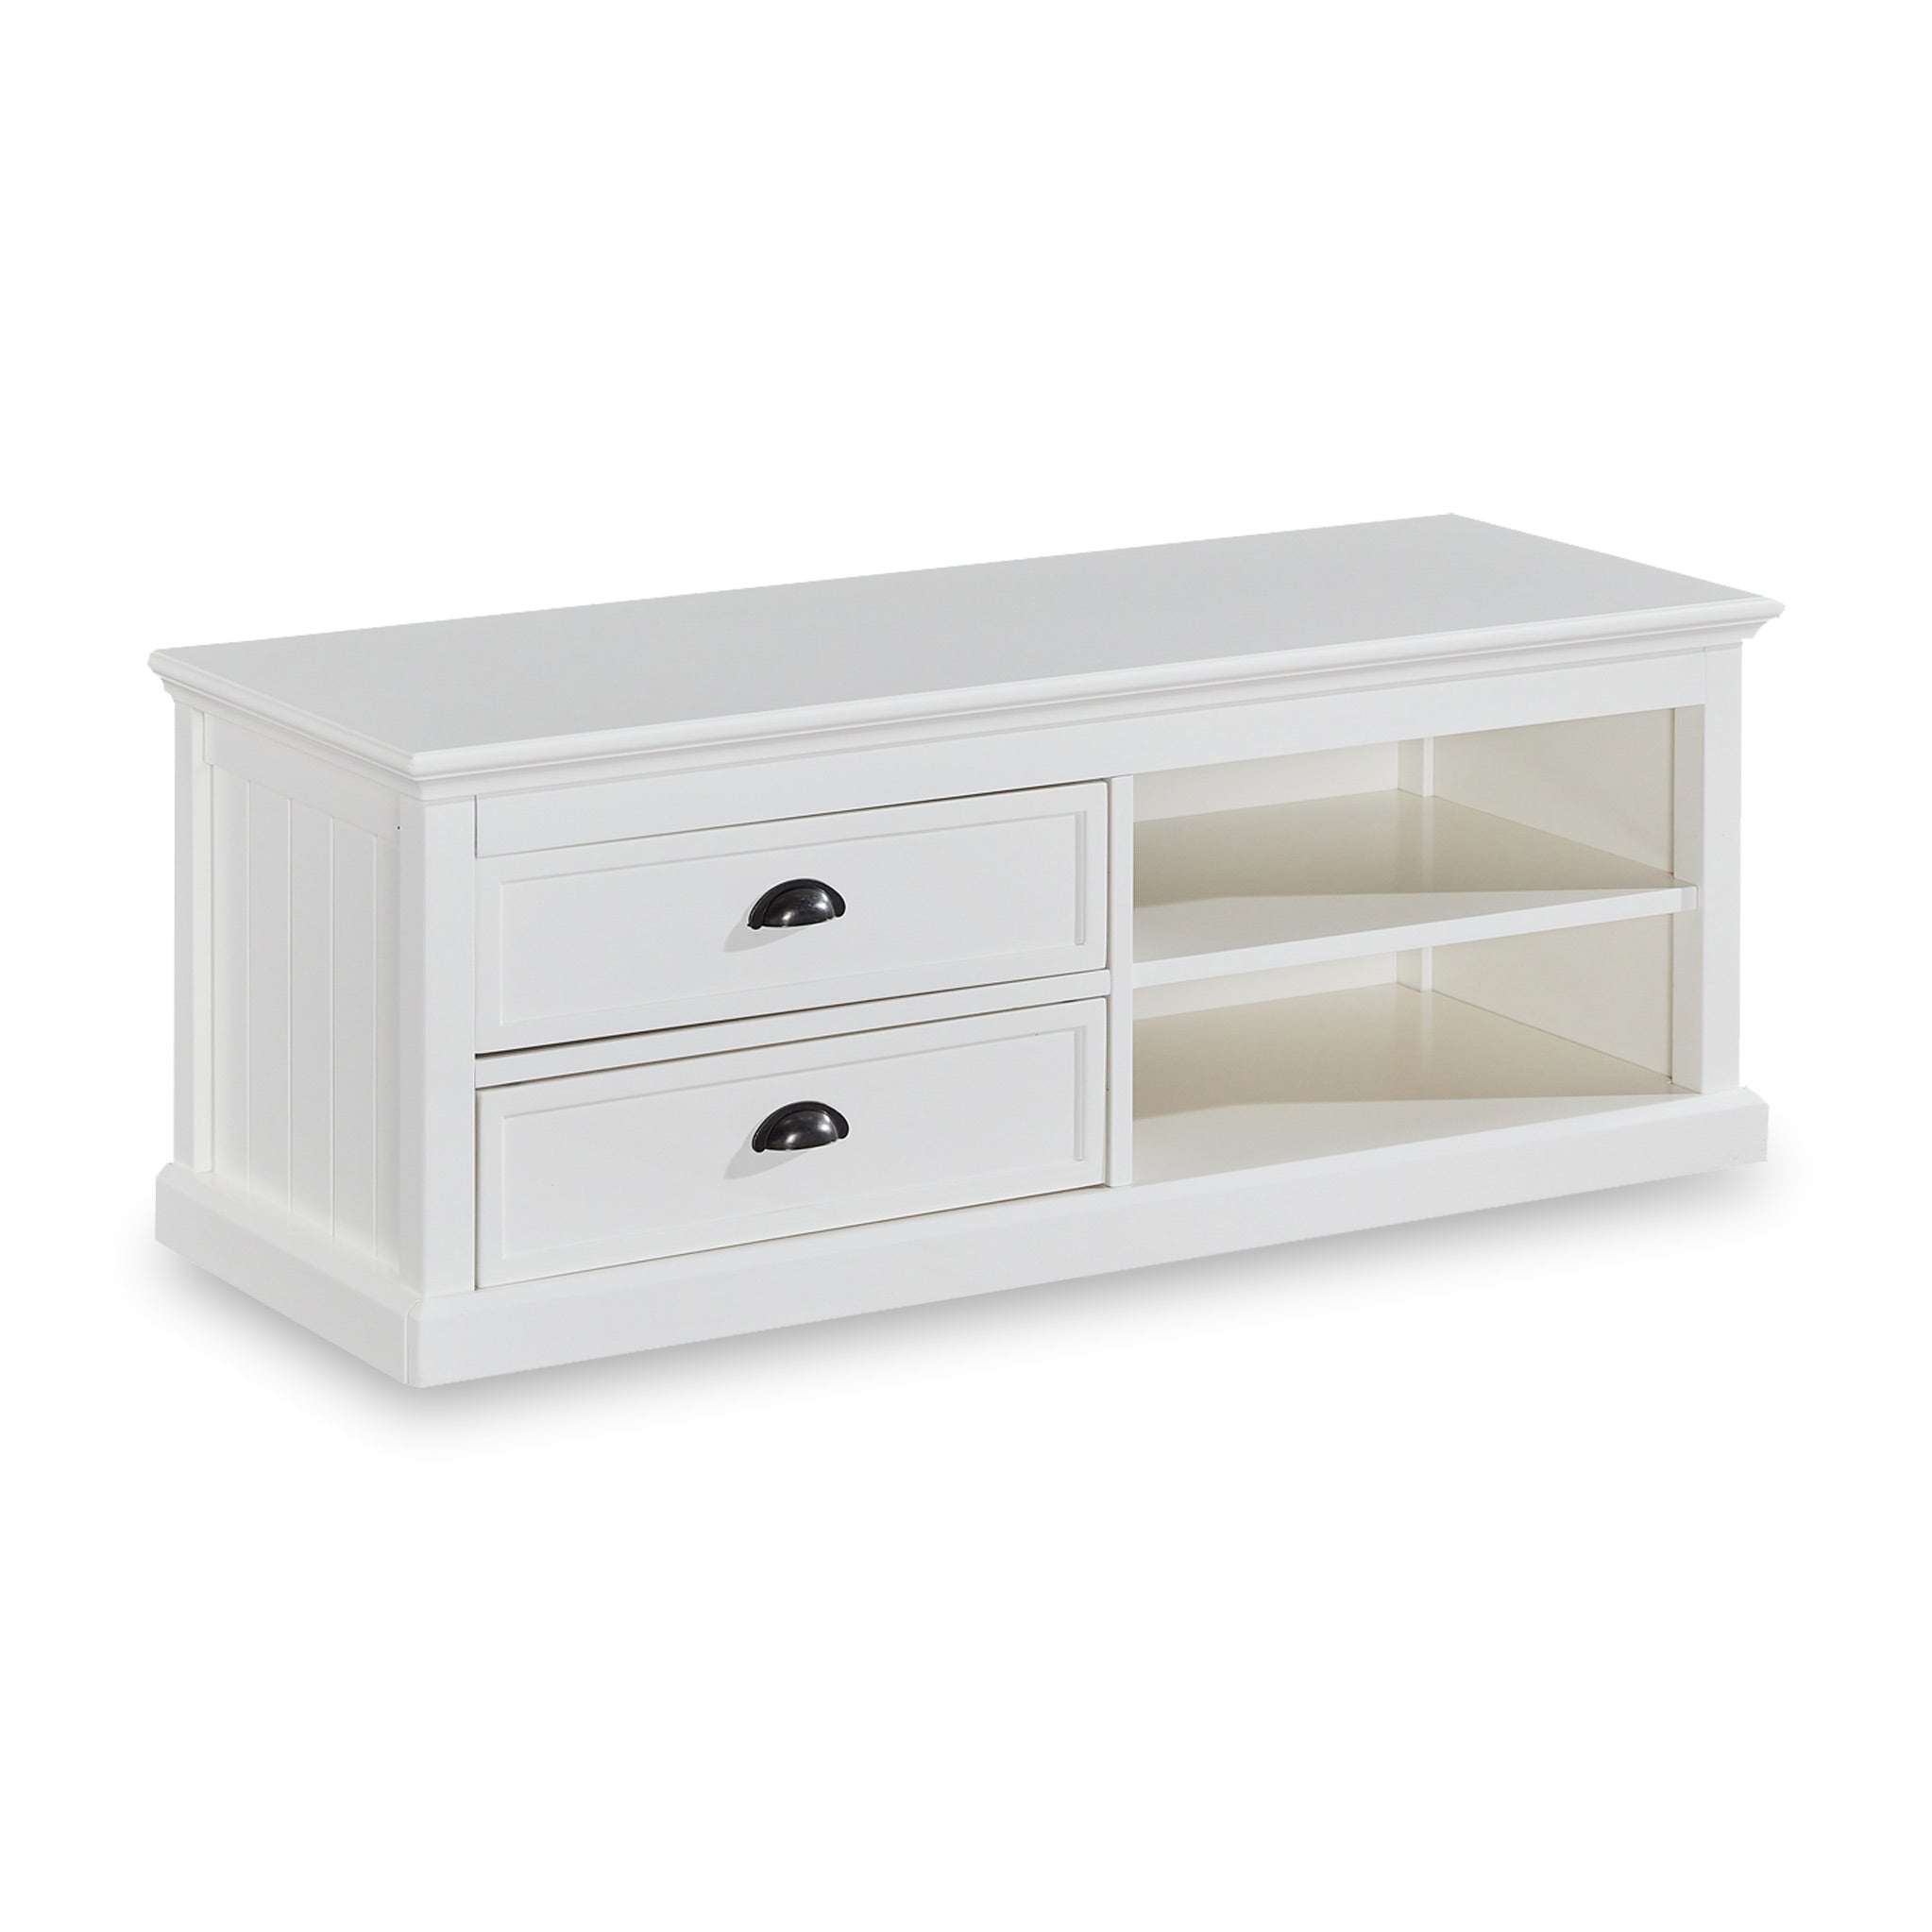 Leighton White 120cm Wide Tv Cabinet Unit With Storage Roseland